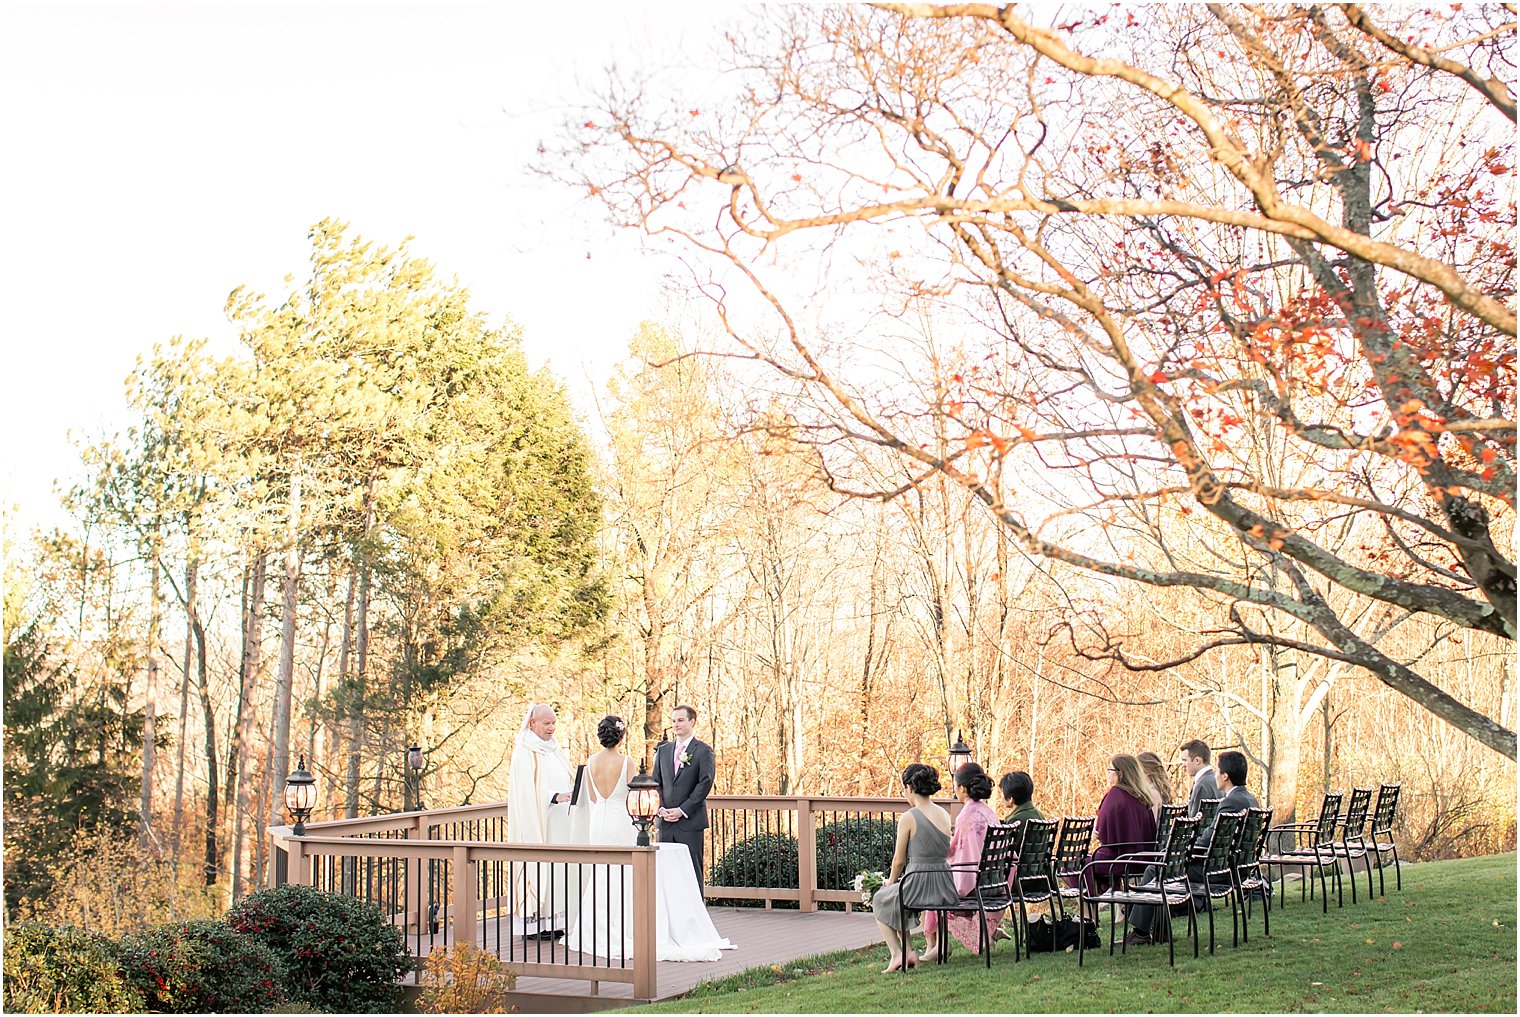 Outdoor fall ceremony in the Poconos Mountains